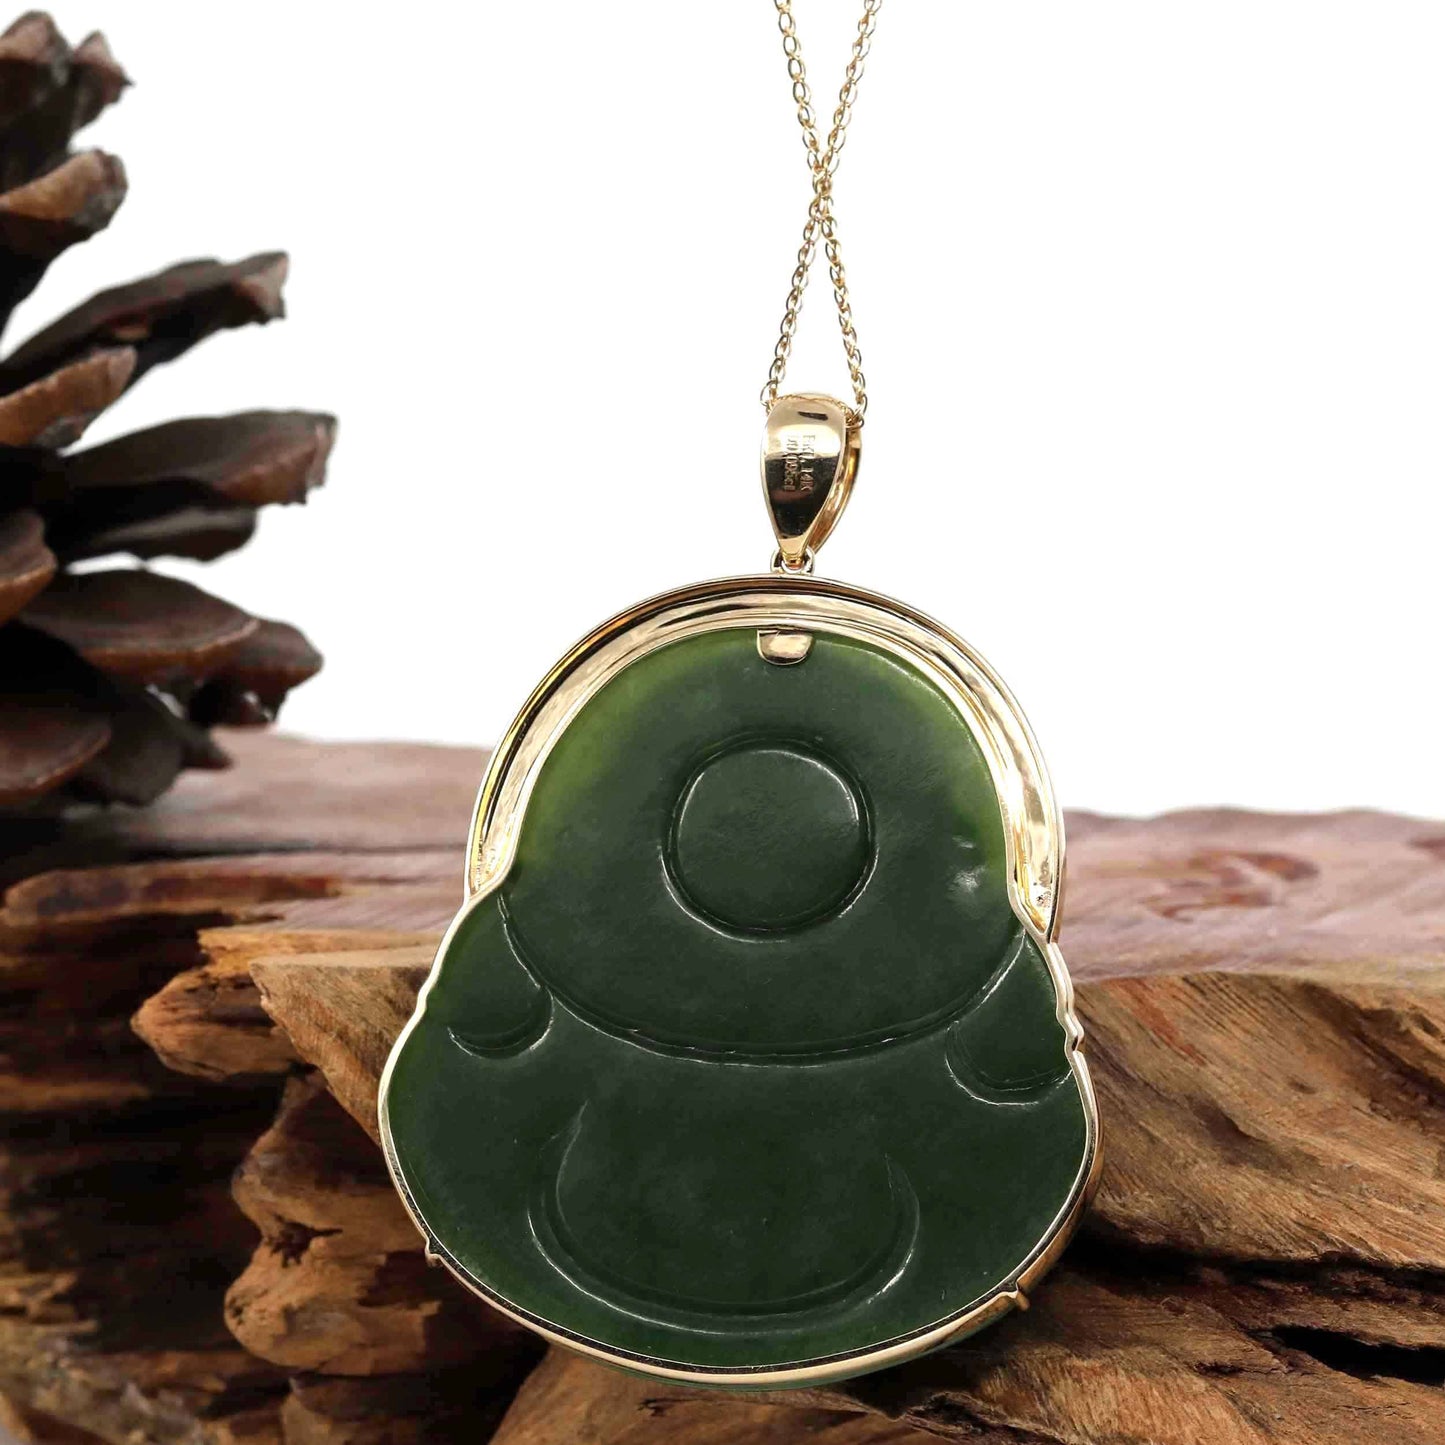 RealJade® Co. Gold Jade Buddha Pendant Only Baikalla "Laughing Buddha" Large 18k Yellow Gold Genuine Nephrite Green Jade with Diamonds Buddha Pendant Necklace High-end Collectable